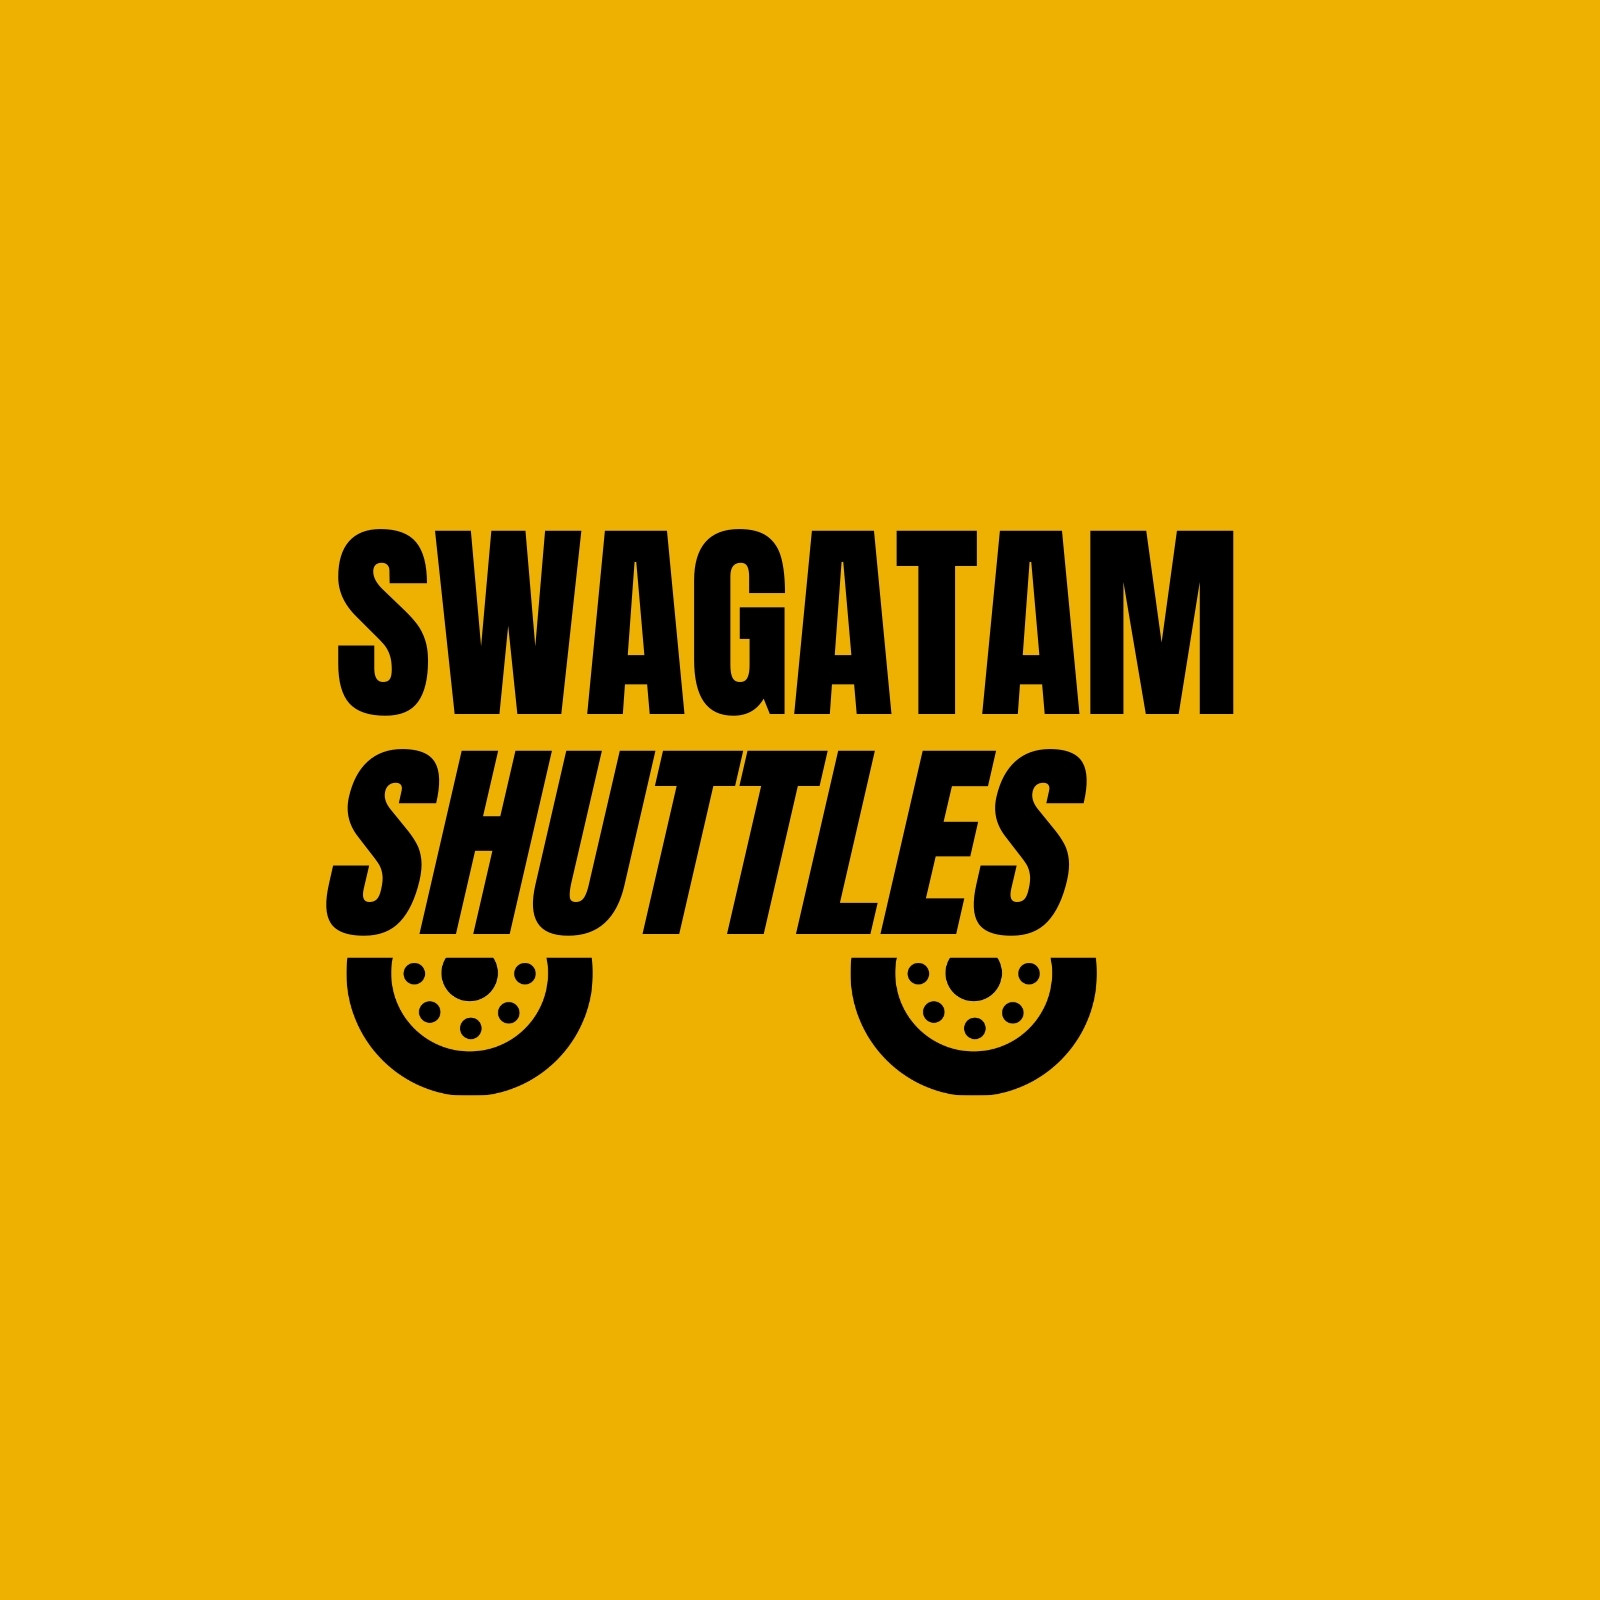 Download Logo Swagat Indian Cuisine - Swagatam In Nepali - Full Size PNG  Image - PNGkit